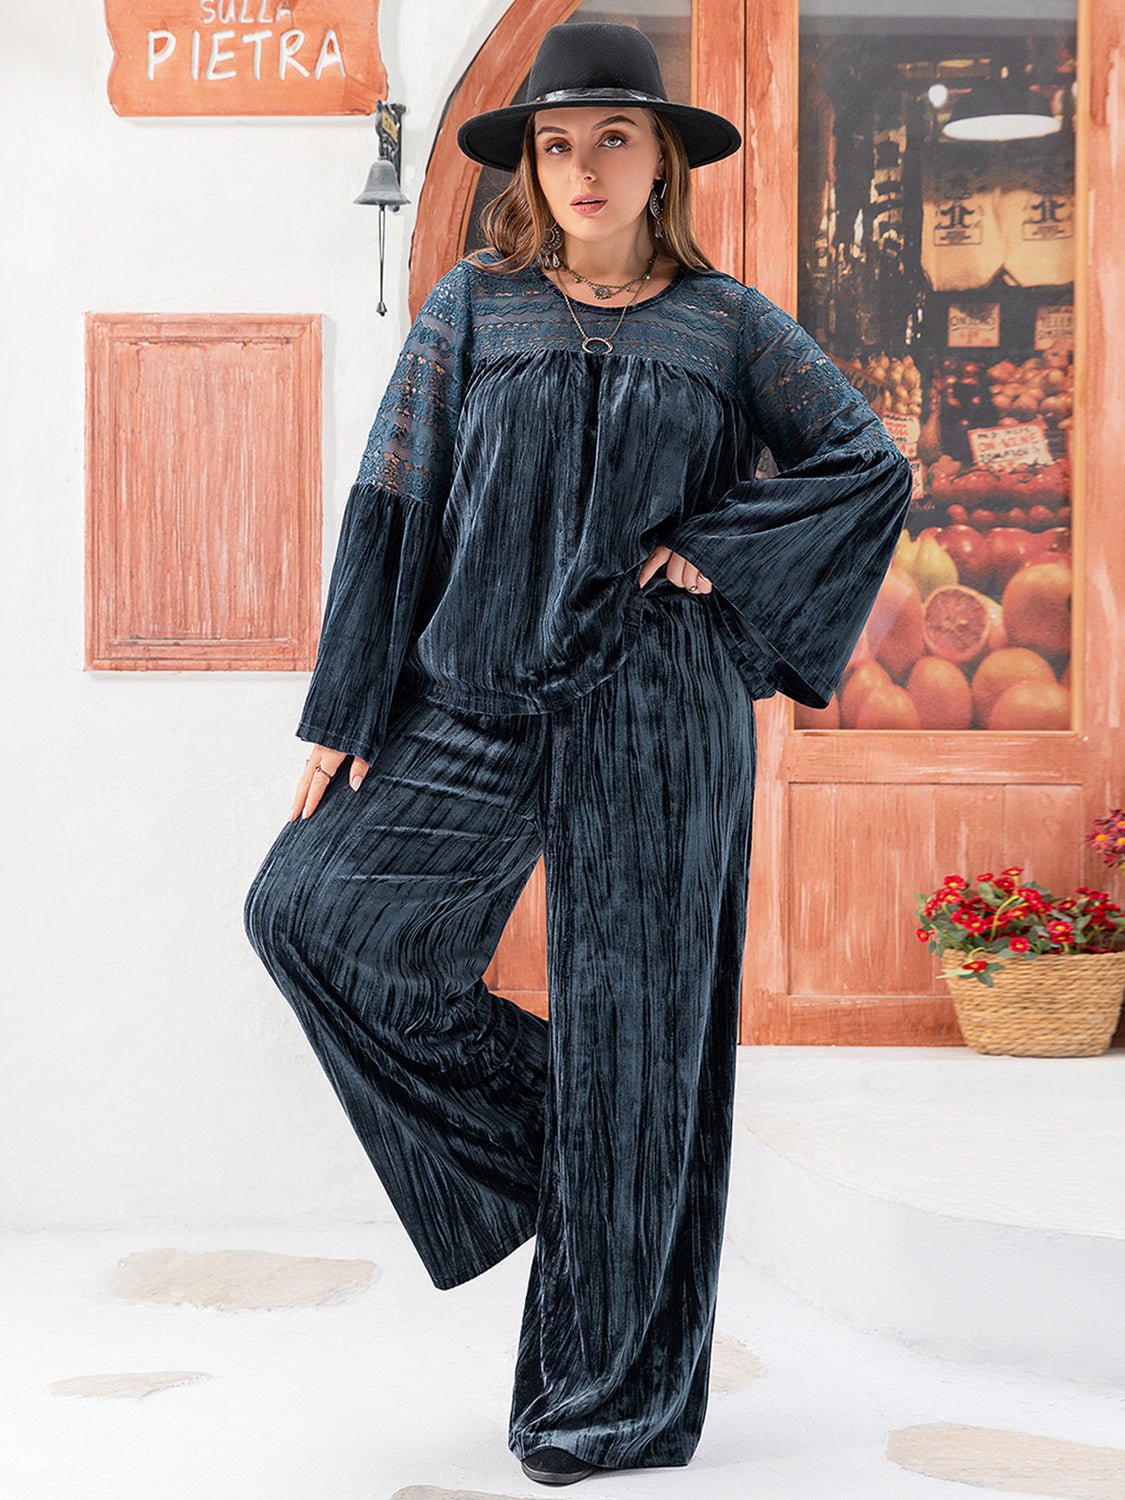 Plus Size Flare Sleeve Top and Pants Set in Peacock BluePants SetBeach Rose Co.